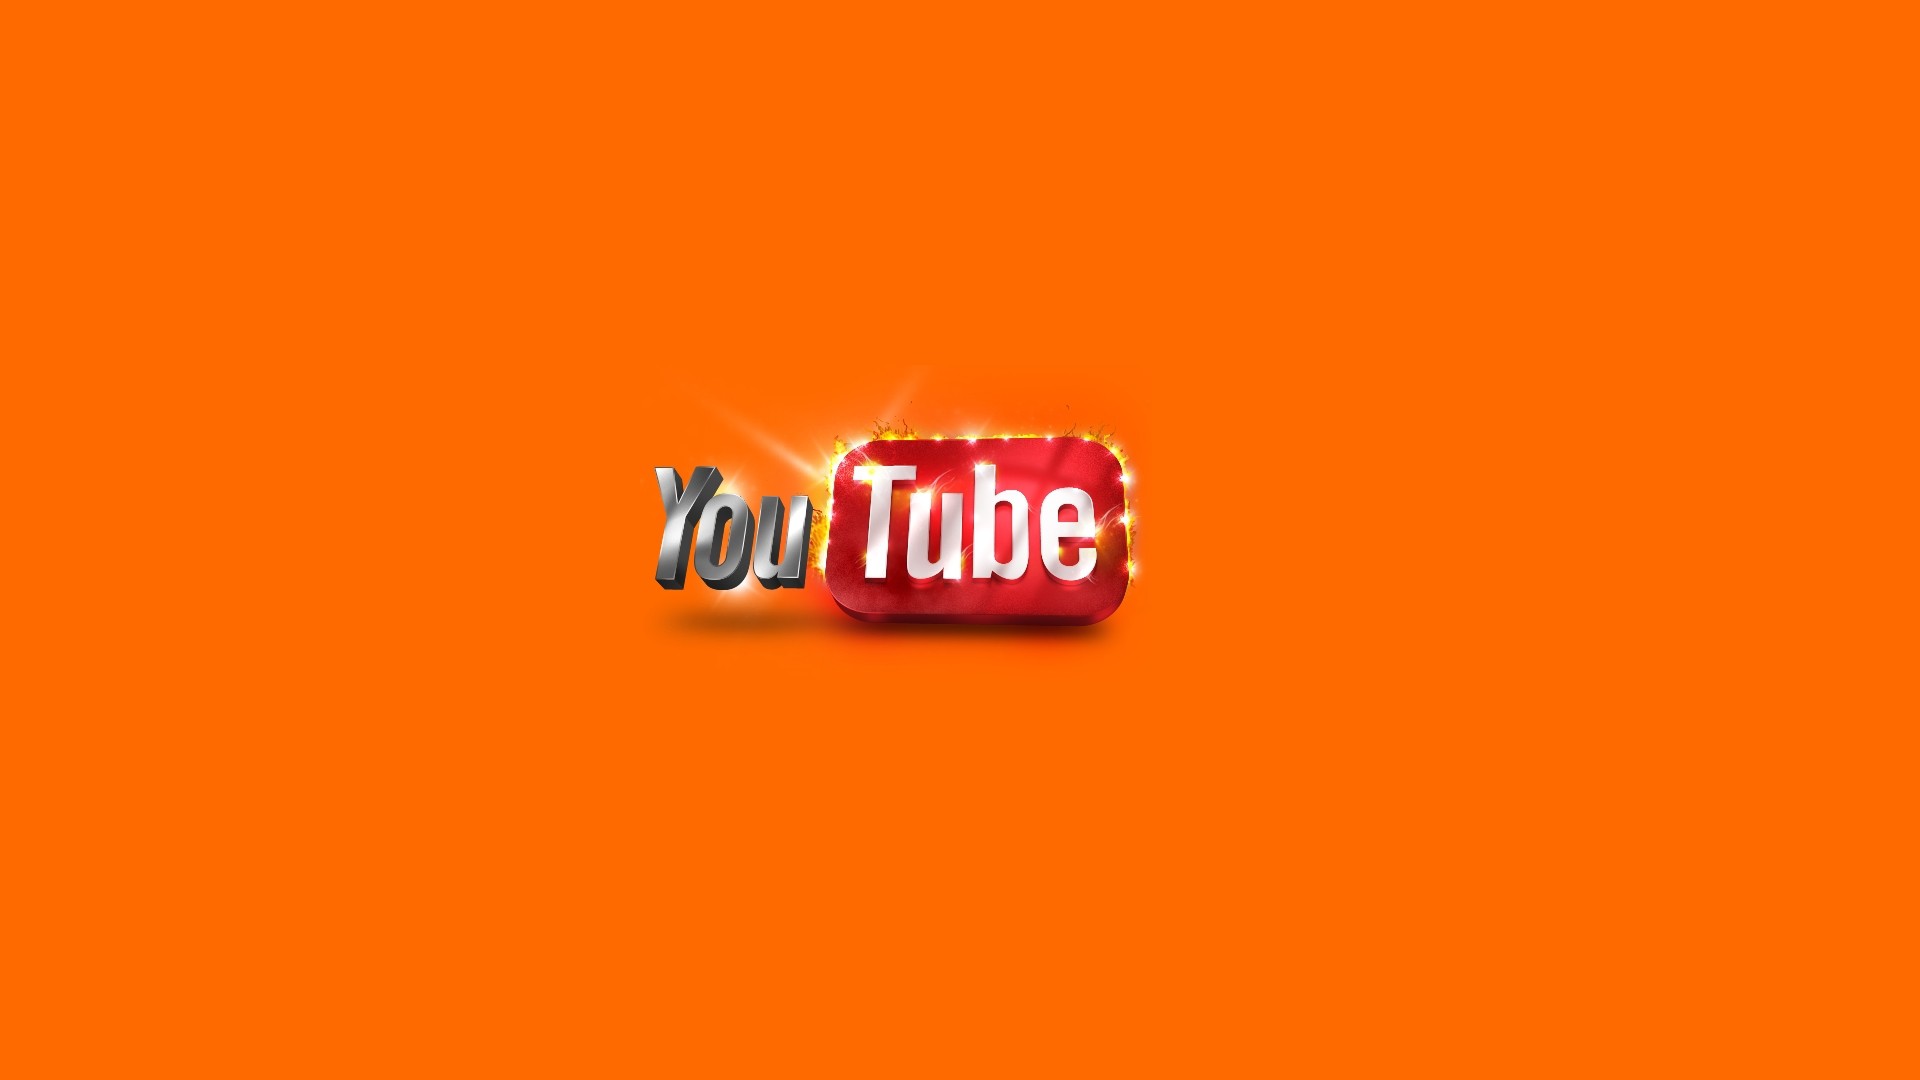 Youtube background wallpaper | 3d and abstract | Wallpaper Better